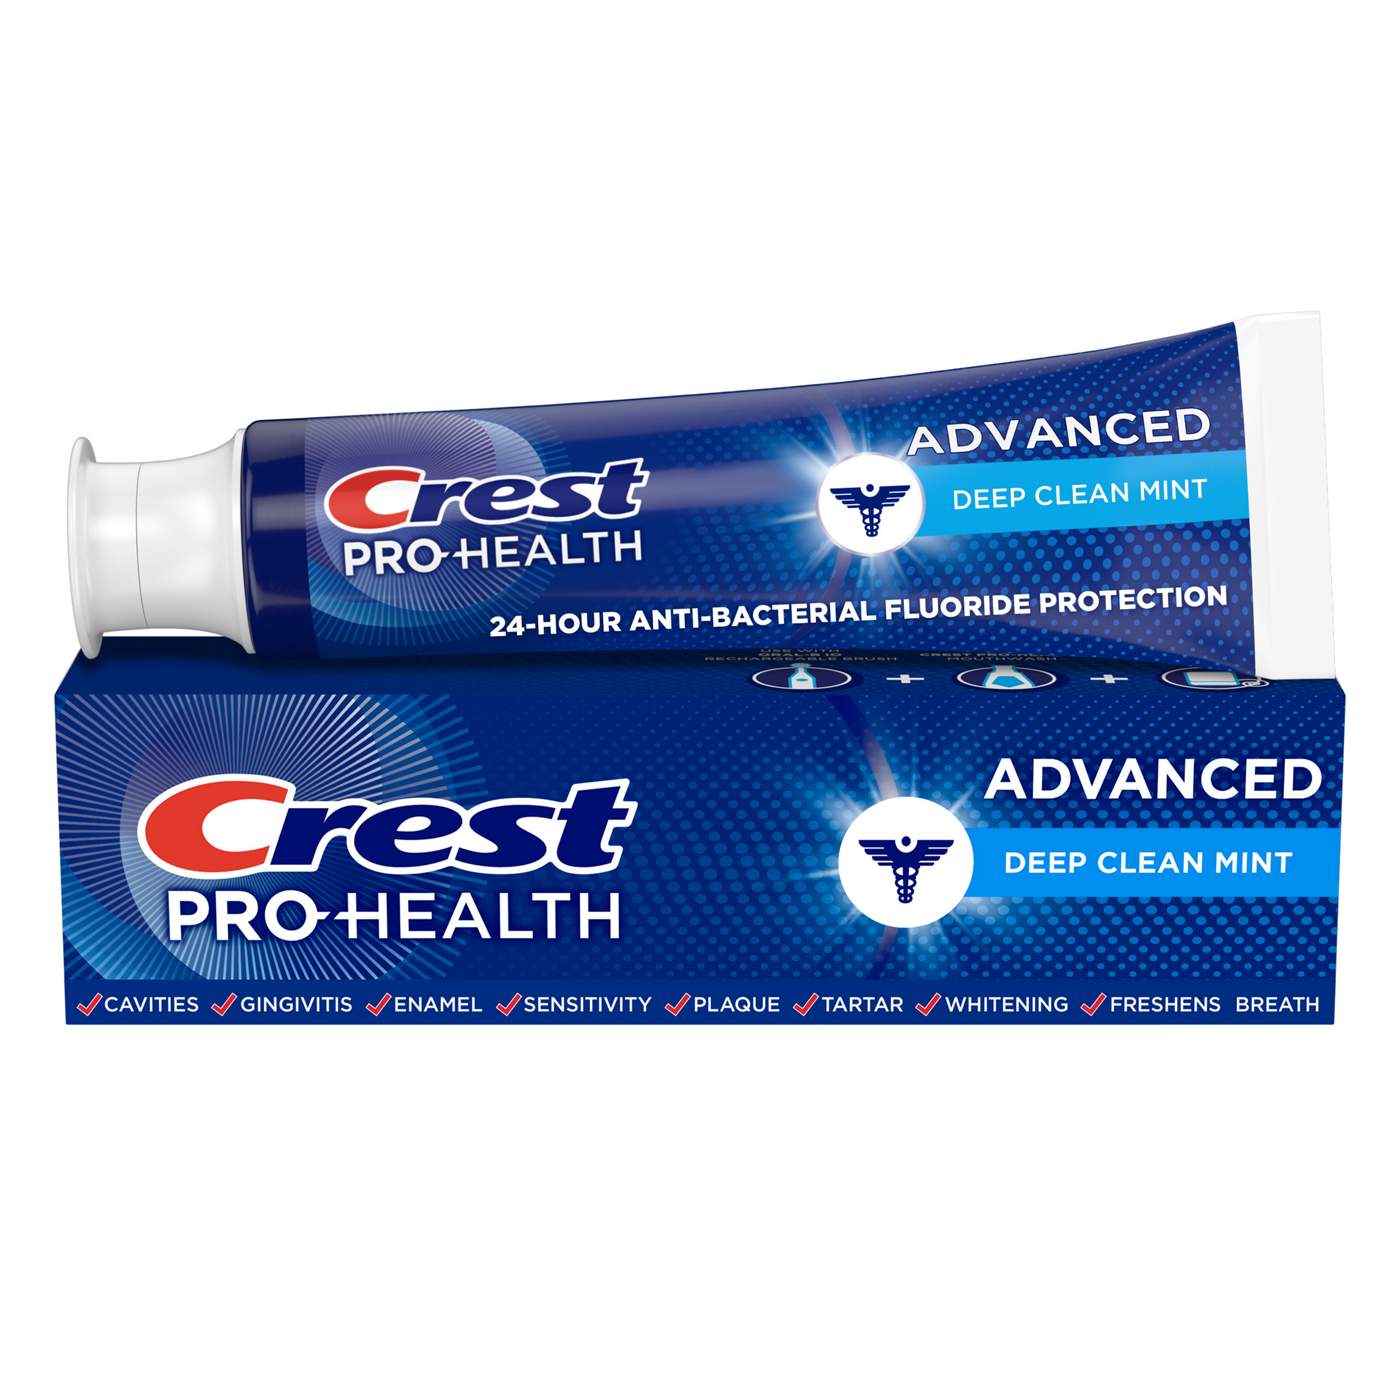 Crest Pro-Health Advanced Tooth Paste - Deep Clean Mint; image 8 of 9